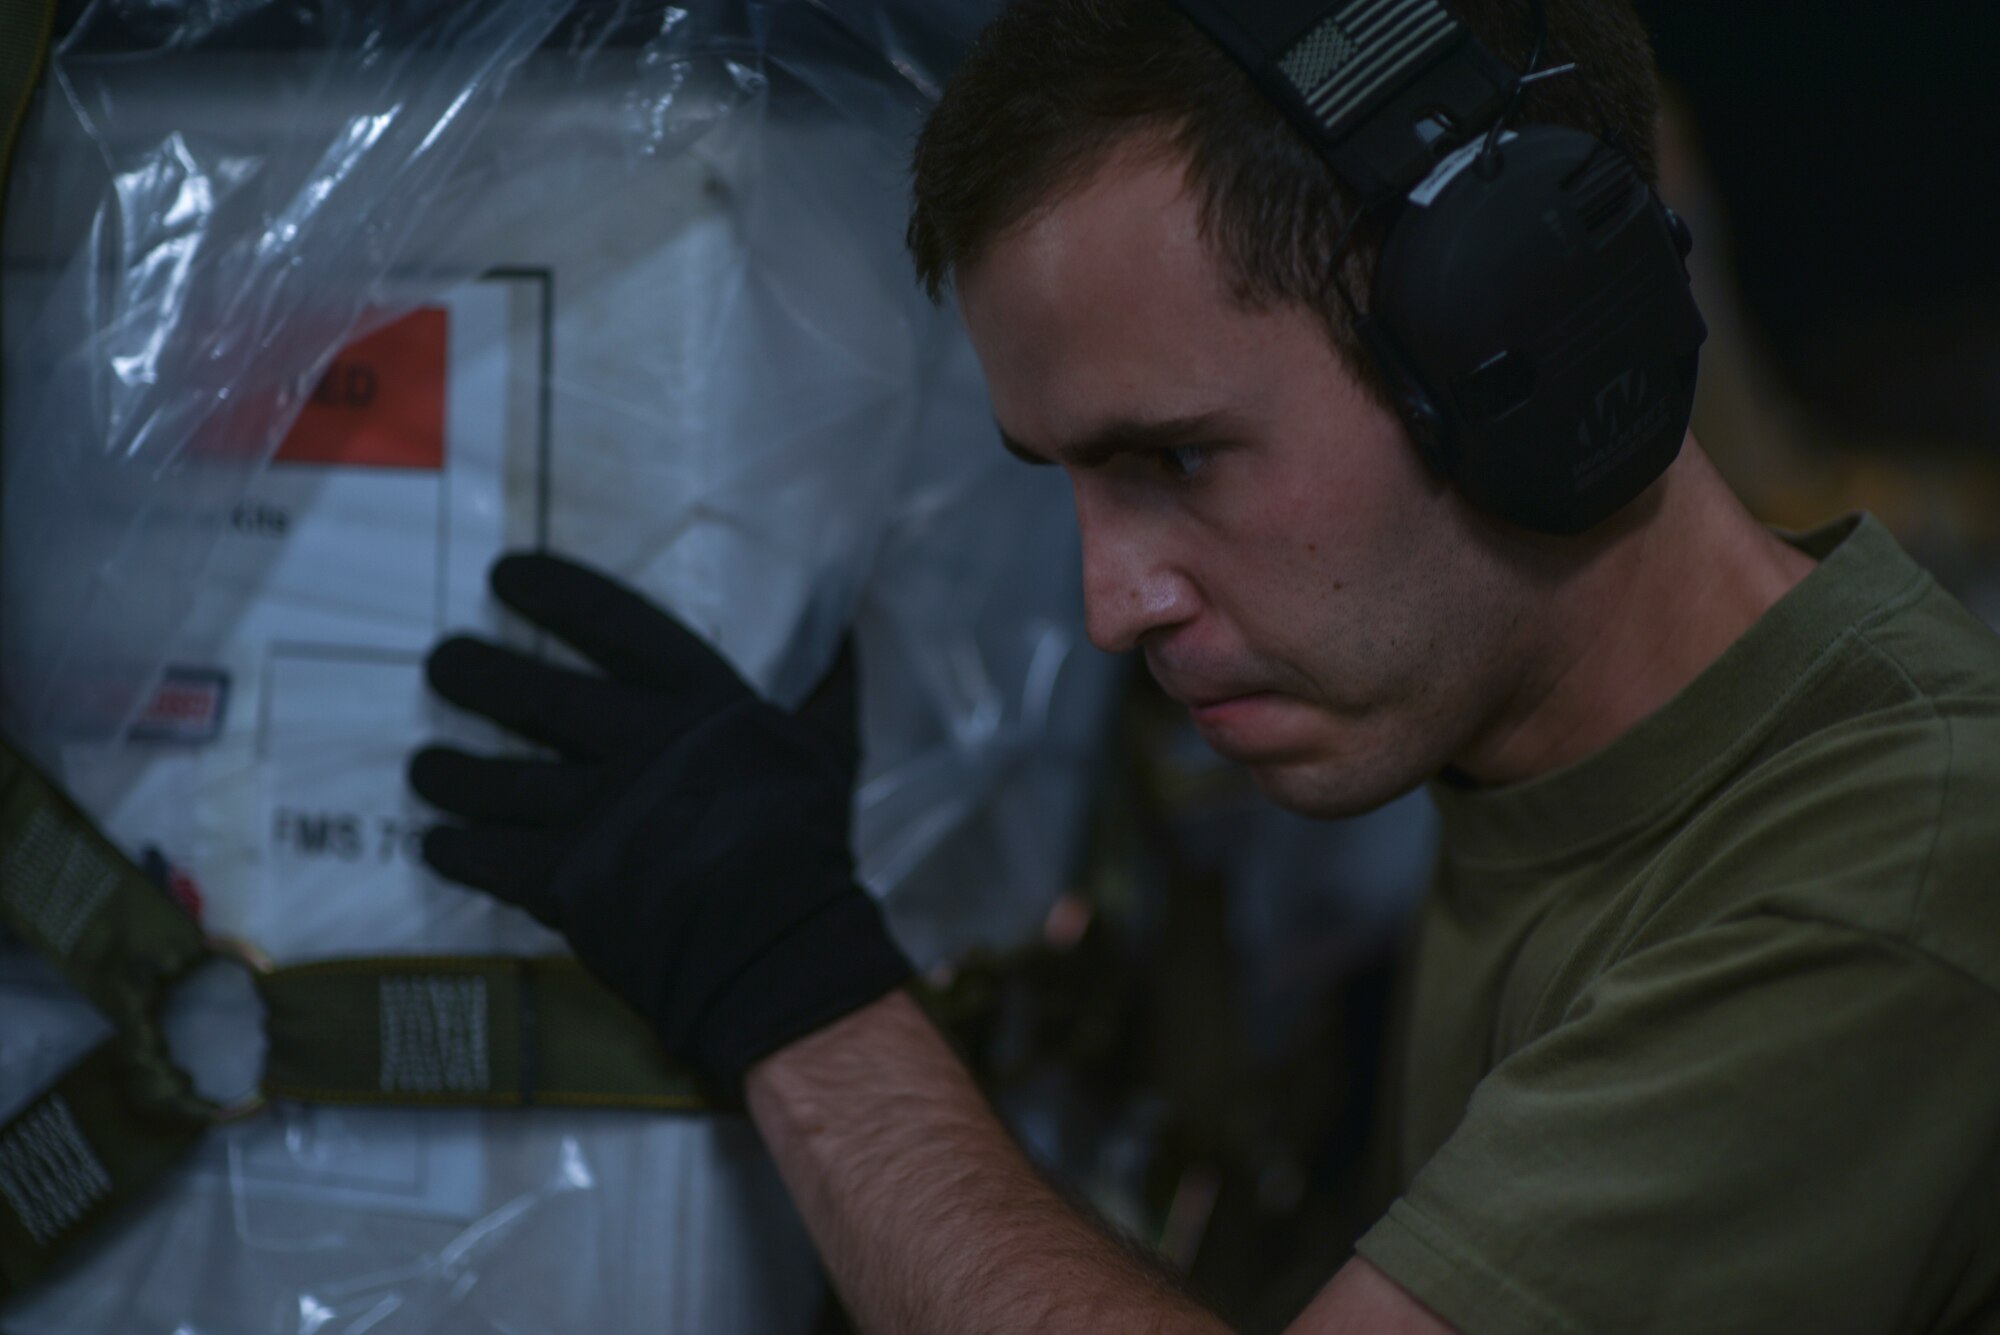 U.S. Air Force Senior Airman Daniel Hofensperger, 735th Air Mobility Squadron air freight journeyman, inspects cargo to ensure pallets are ready for flight at Joint Base Pearl Harbor-Hickam, Hawaii, April  3, 2020. The 735th AMS provided personal protective equipment and medical supplies to the Mariana Islands in response to the COVID-19 pandemic.   (U.S. Air Force photo by Tech. Sgt. Anthony Nelson Jr.)